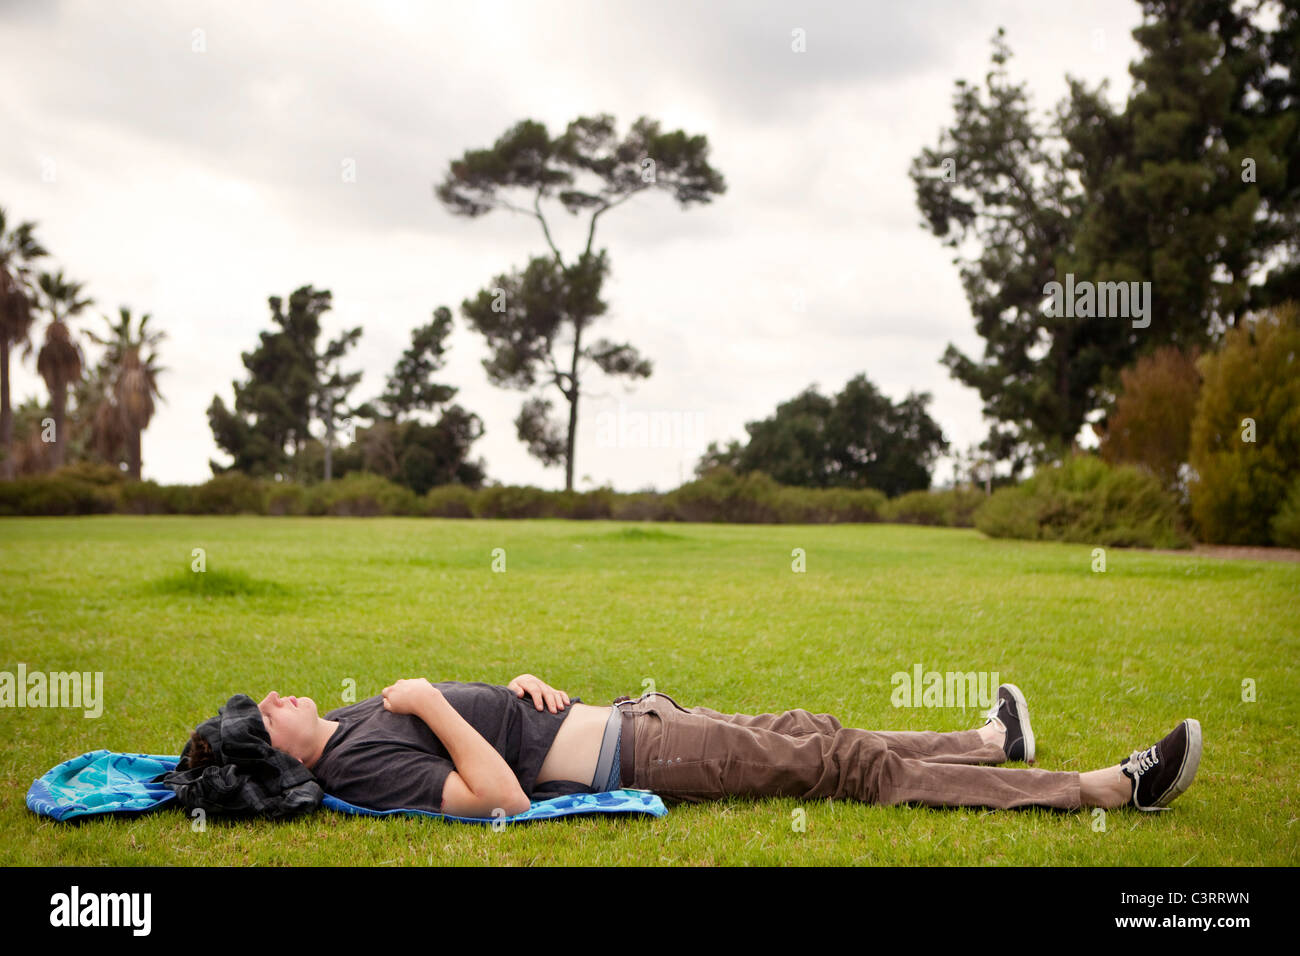 Caucasian man laying in grass in park Stock Photo